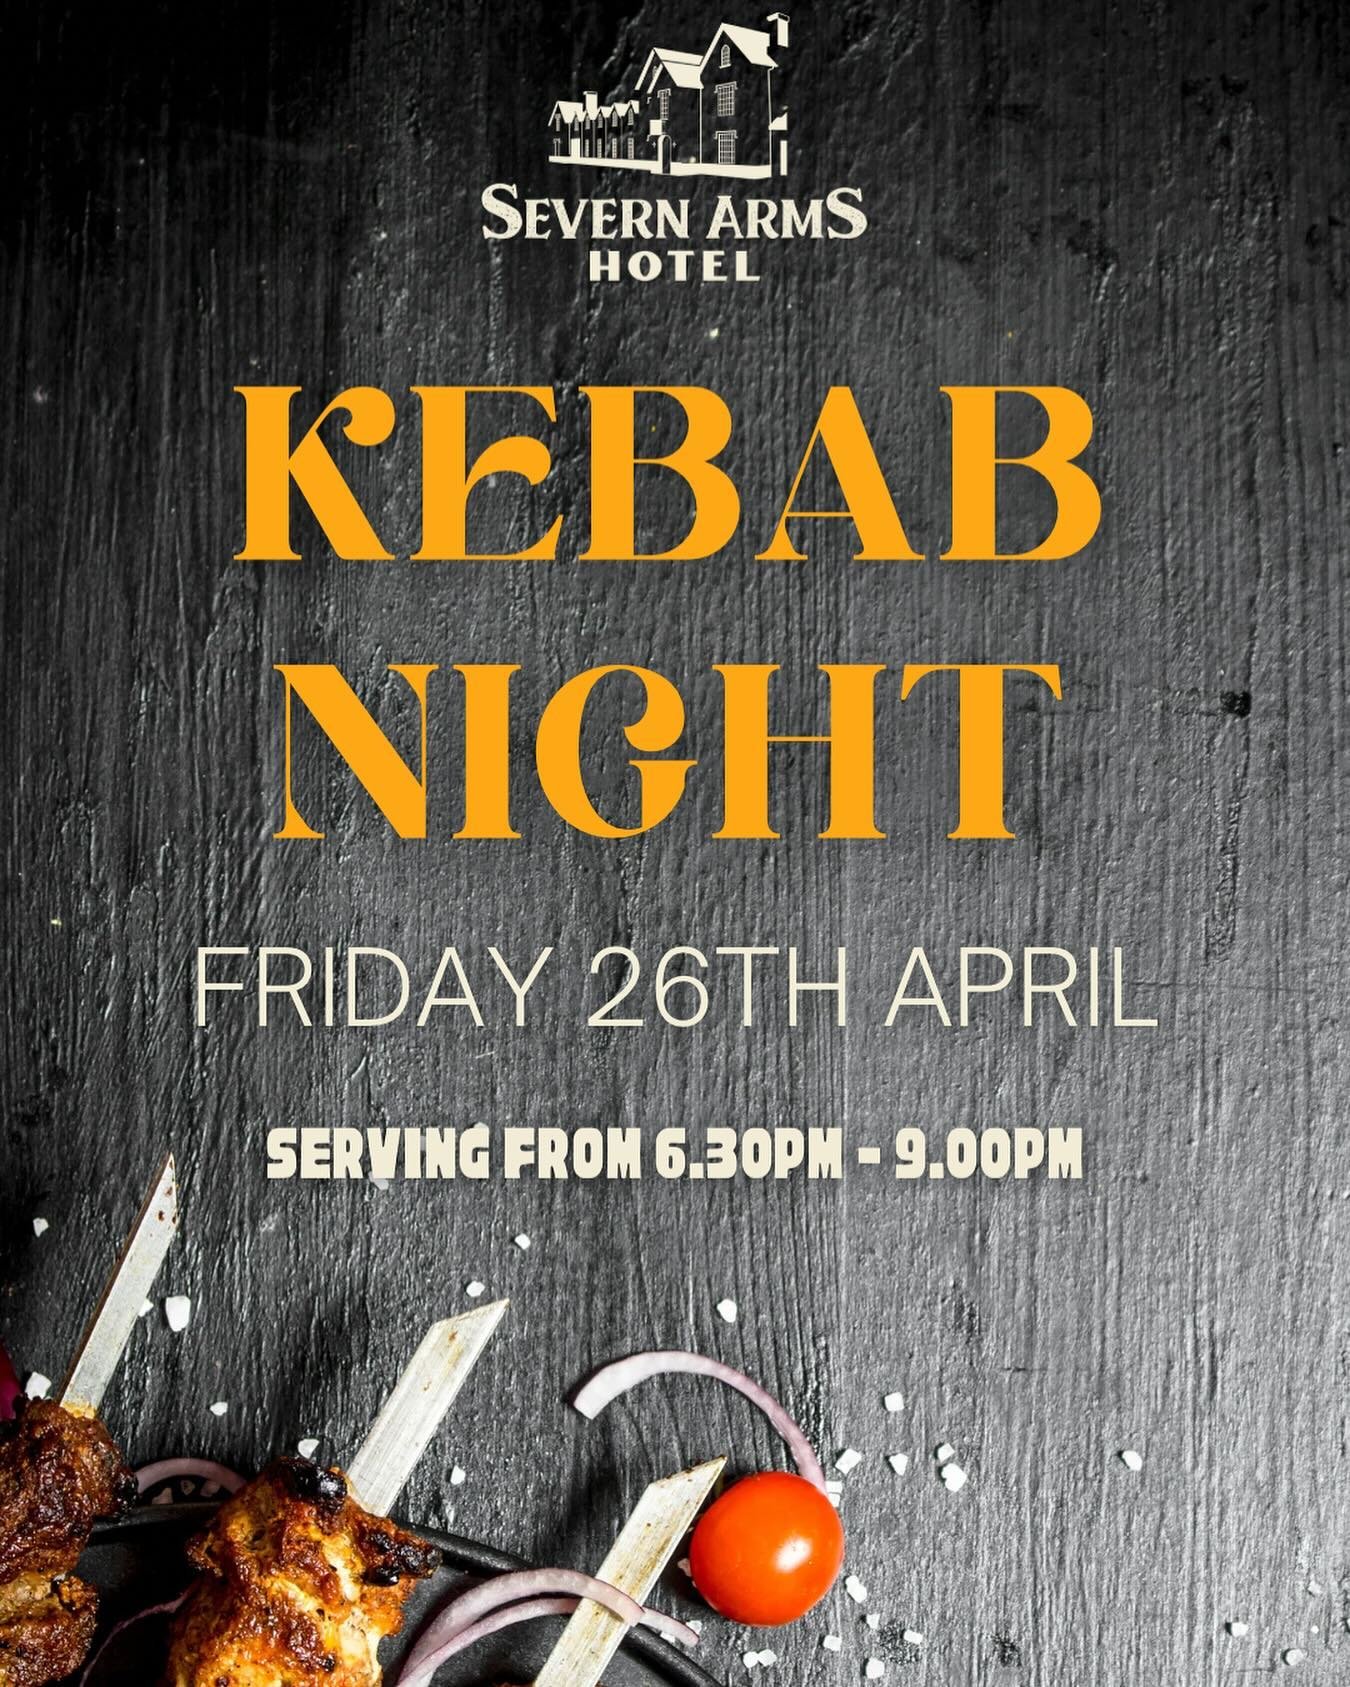 🥩🍟 Severn Arms - Kebab Night 🍟🥙

Dive in to a flavour packed feast at our first Kebab Night!

🗓️ Friday 26th April.
🕰️ Serving from 6.30pm - 9.00pm.

&pound;13.50 per person.

All of our bookings are taken over the phone, please call the number